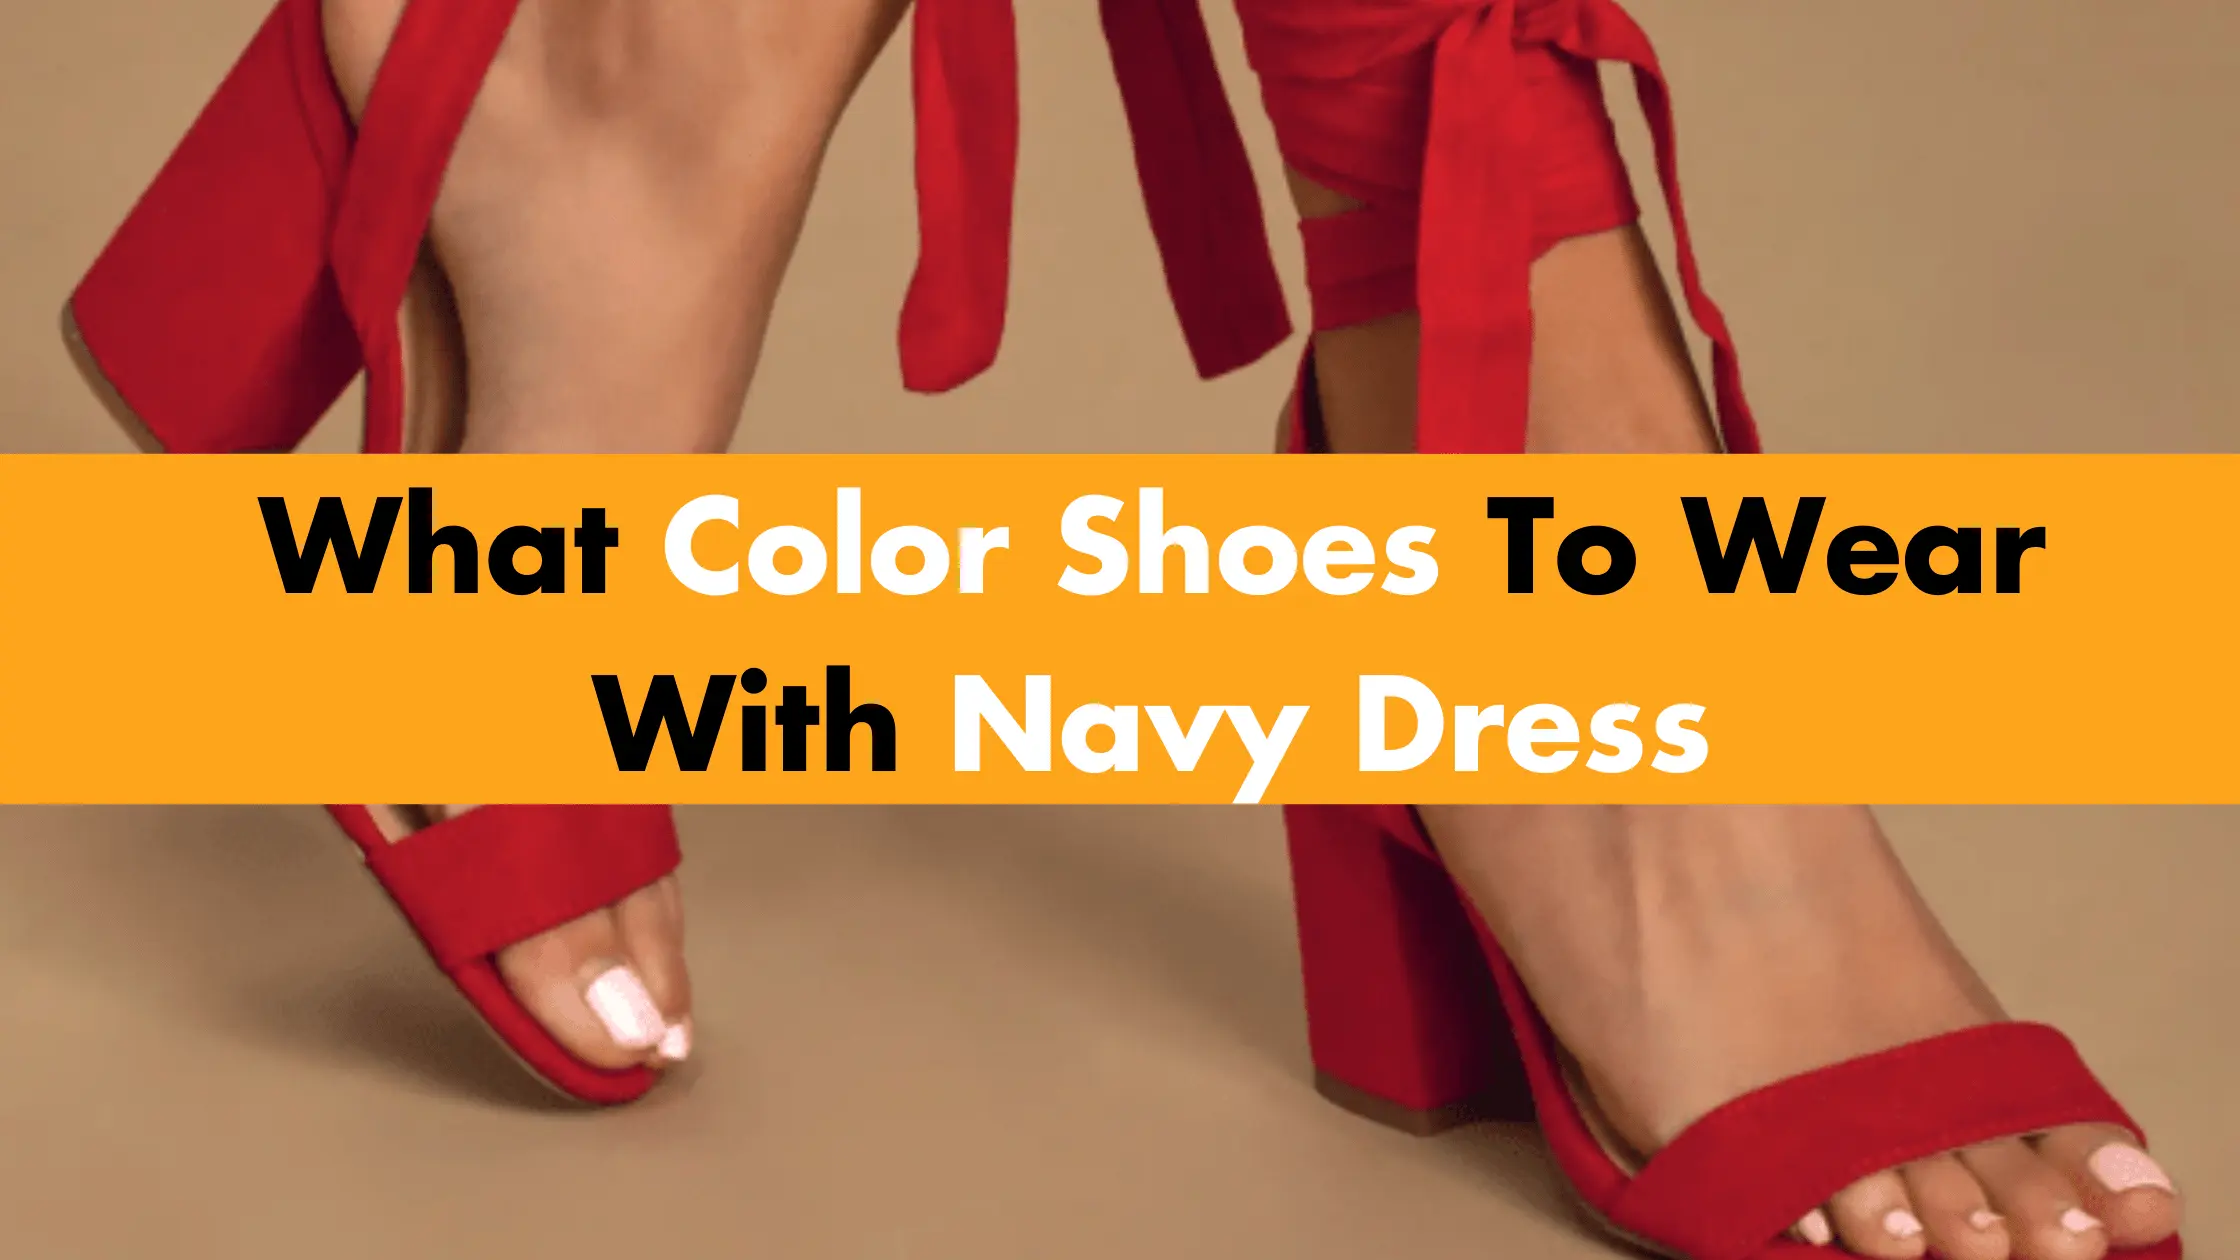 What Color Shoes To Wear With Navy Dress?